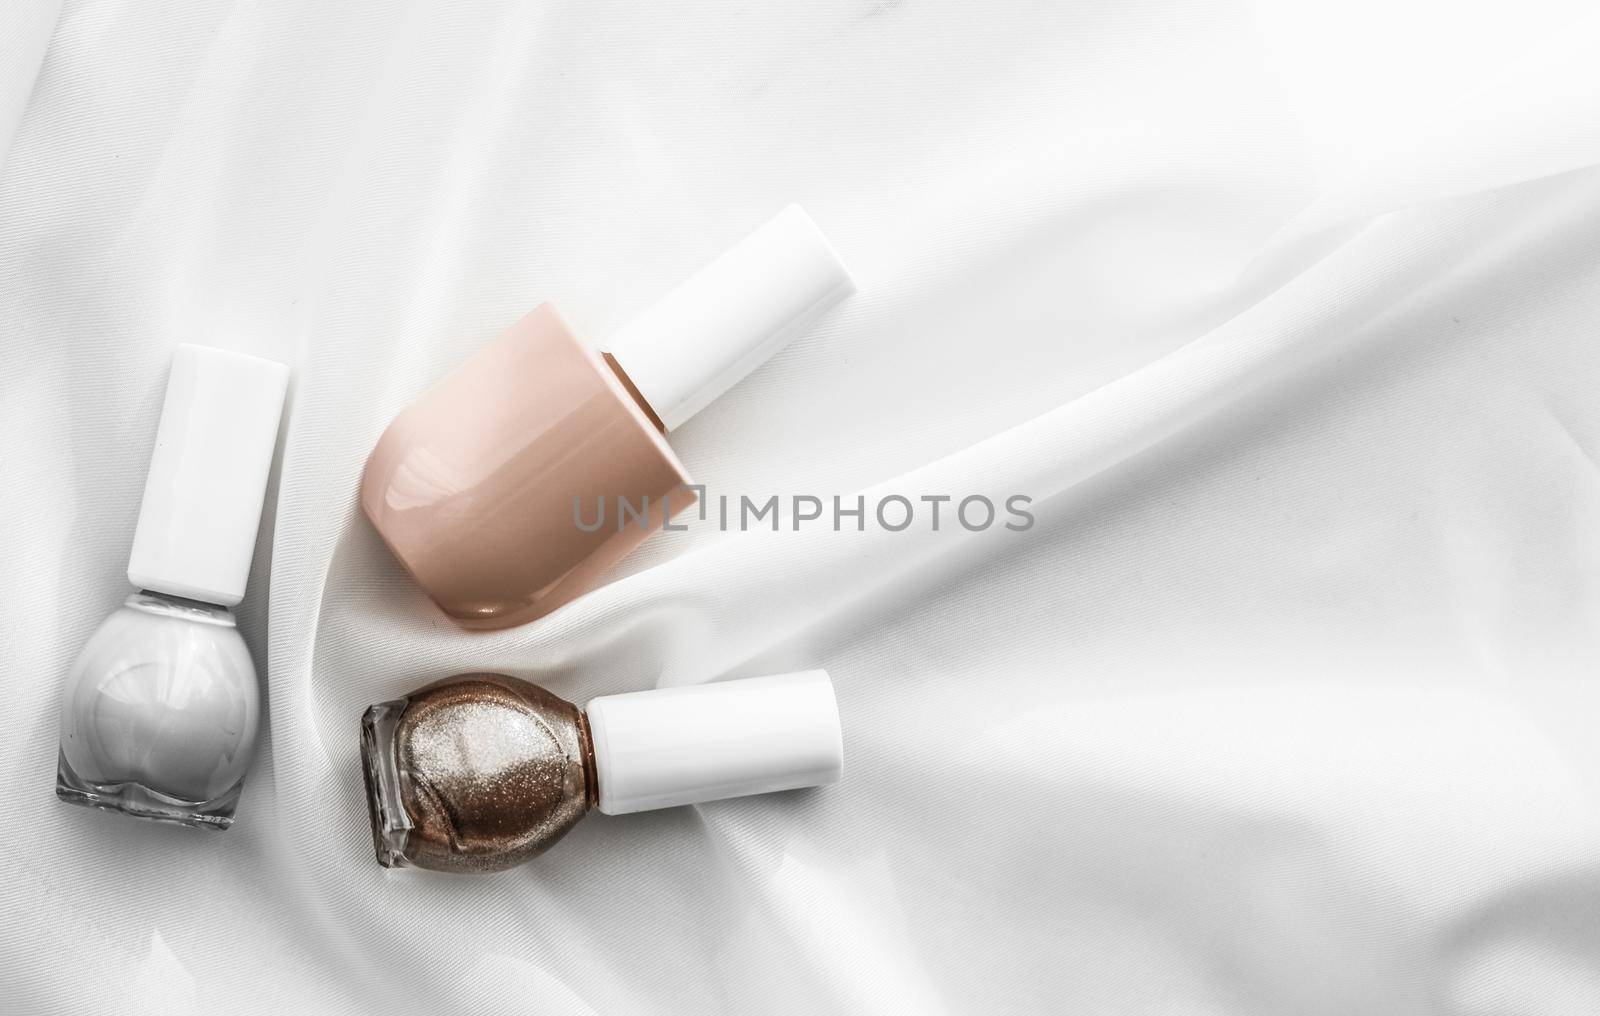 Nail polish bottles on silk background, french manicure products and nailpolish make-up cosmetics for luxury beauty brand and holiday flatlay art design by Anneleven